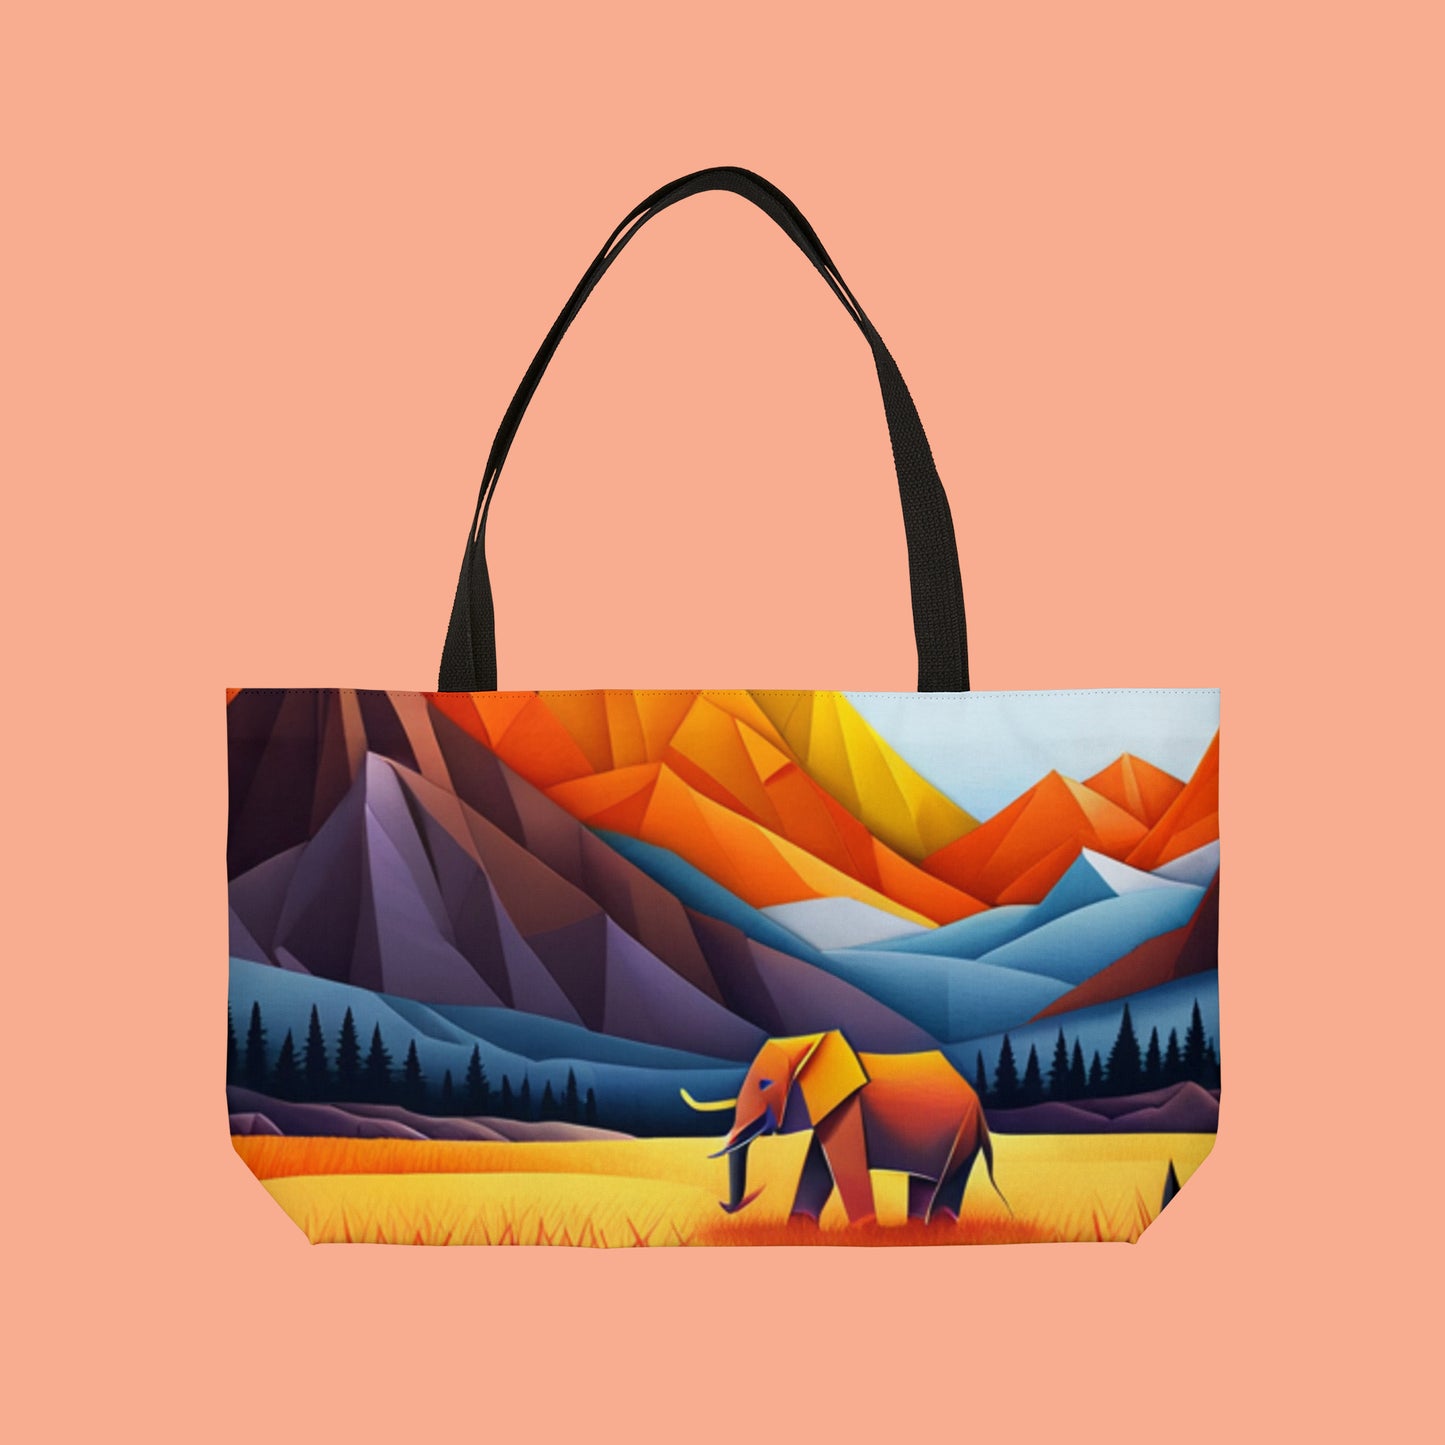 Colorful mountains with an elephant inspired Origami style design on this Weekender Tote Bag.